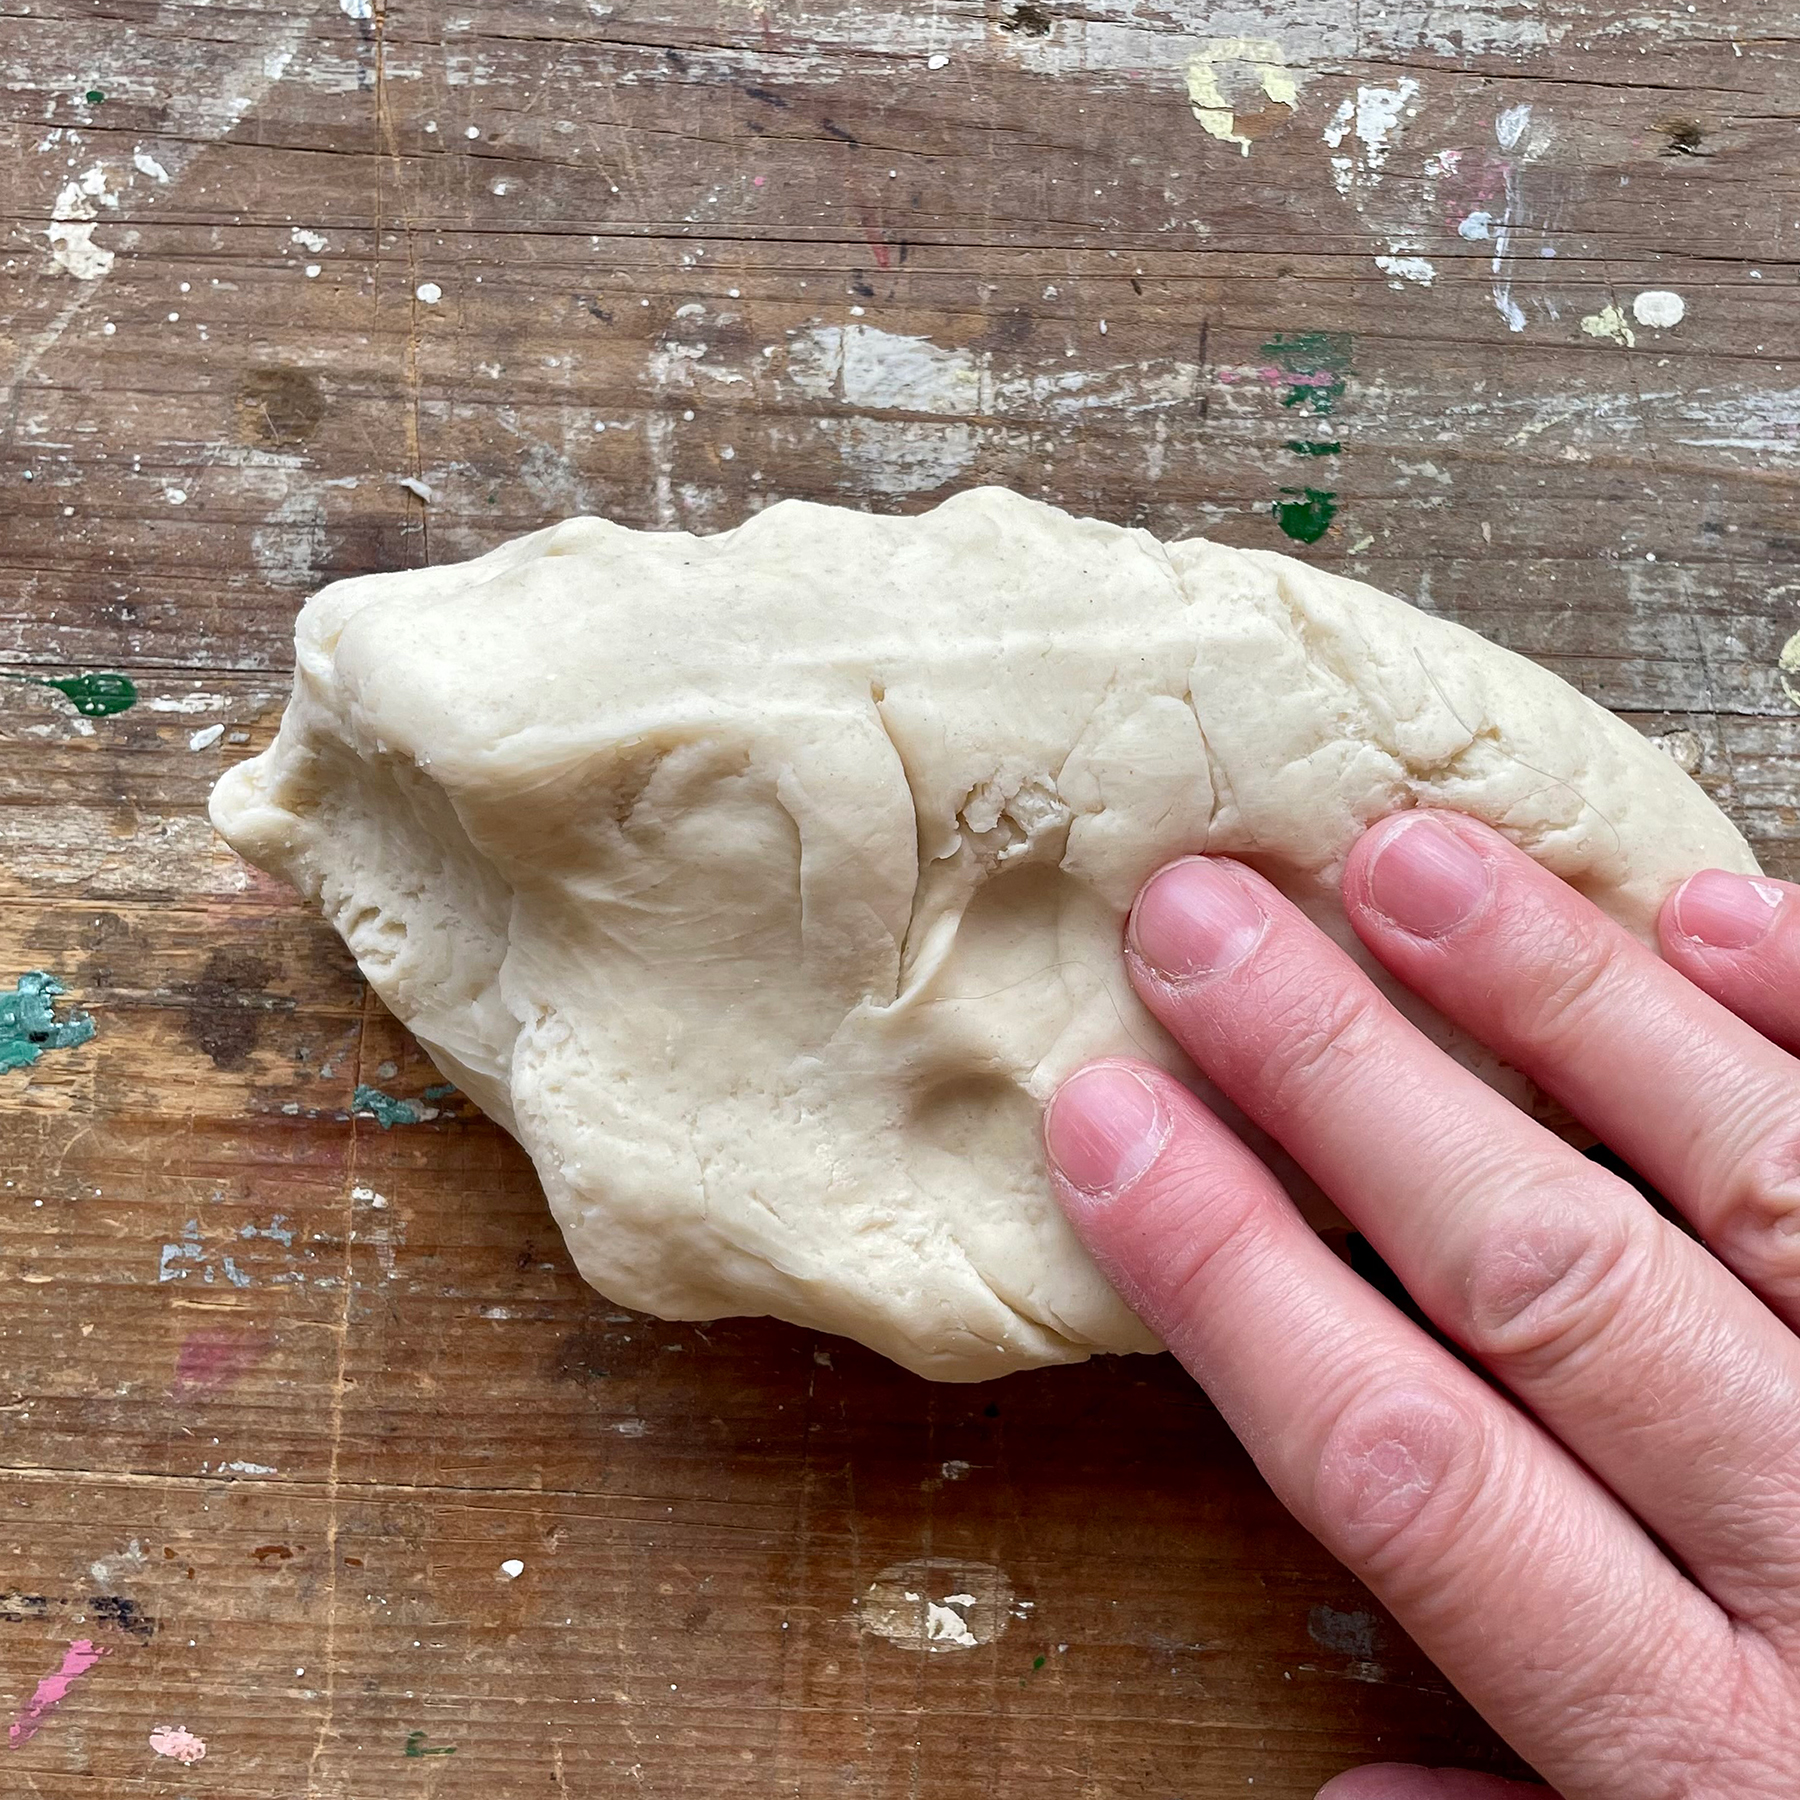 A photo of some homemade dough being kneaded by someone's fingers